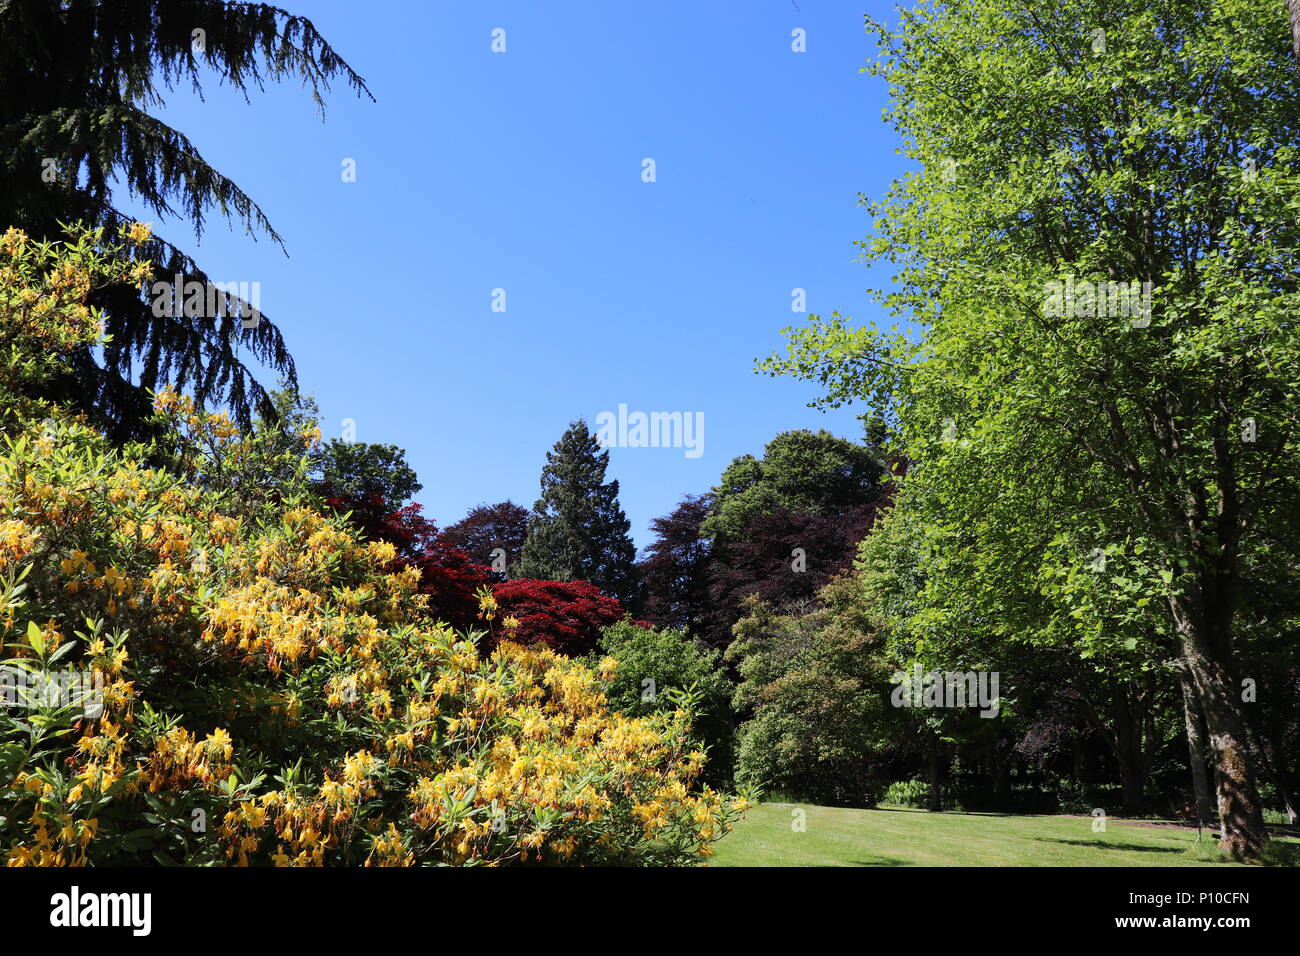 Flowers, plants and shrubs in formal garden against blue sky Stock Photo